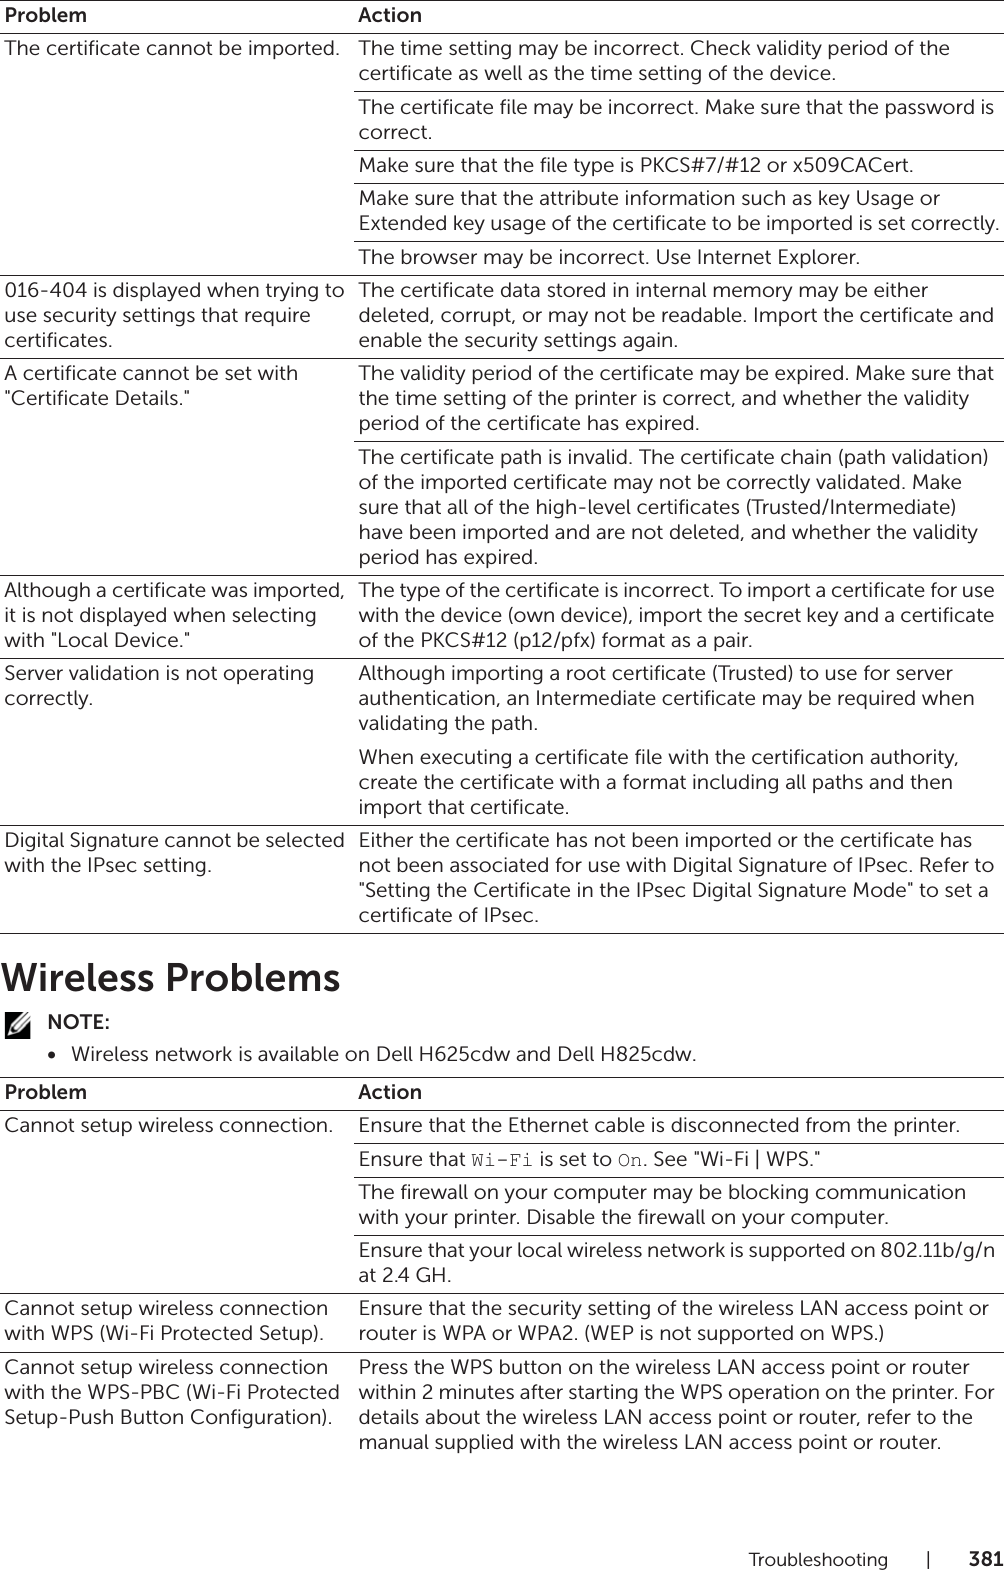 Troubleshooting |381Wireless ProblemsNOTE:•Wireless network is available on Dell H625cdw and Dell H825cdw.The certificate cannot be imported. The time setting may be incorrect. Check validity period of the certificate as well as the time setting of the device.The certificate file may be incorrect. Make sure that the password is correct.Make sure that the file type is PKCS#7/#12 or x509CACert.Make sure that the attribute information such as key Usage or Extended key usage of the certificate to be imported is set correctly.The browser may be incorrect. Use Internet Explorer.016-404 is displayed when trying to use security settings that require certificates.The certificate data stored in internal memory may be either deleted, corrupt, or may not be readable. Import the certificate and enable the security settings again.A certificate cannot be set with &quot;Certificate Details.&quot;The validity period of the certificate may be expired. Make sure that the time setting of the printer is correct, and whether the validity period of the certificate has expired.The certificate path is invalid. The certificate chain (path validation) of the imported certificate may not be correctly validated. Make sure that all of the high-level certificates (Trusted/Intermediate) have been imported and are not deleted, and whether the validity period has expired.Although a certificate was imported, it is not displayed when selecting with &quot;Local Device.&quot;The type of the certificate is incorrect. To import a certificate for use with the device (own device), import the secret key and a certificate of the PKCS#12 (p12/pfx) format as a pair.Server validation is not operating correctly.Although importing a root certificate (Trusted) to use for server authentication, an Intermediate certificate may be required when validating the path.When executing a certificate file with the certification authority, create the certificate with a format including all paths and then import that certificate.Digital Signature cannot be selected with the IPsec setting.Either the certificate has not been imported or the certificate has not been associated for use with Digital Signature of IPsec. Refer to &quot;Setting the Certificate in the IPsec Digital Signature Mode&quot; to set a certificate of IPsec.Problem ActionCannot setup wireless connection. Ensure that the Ethernet cable is disconnected from the printer.Ensure that Wi-Fi is set to On. See &quot;Wi-Fi | WPS.&quot;The firewall on your computer may be blocking communication with your printer. Disable the firewall on your computer.Ensure that your local wireless network is supported on 802.11b/g/n at 2.4 GH.Cannot setup wireless connection with WPS (Wi-Fi Protected Setup).Ensure that the security setting of the wireless LAN access point or router is WPA or WPA2. (WEP is not supported on WPS.)Cannot setup wireless connection with the WPS-PBC (Wi-Fi Protected Setup-Push Button Configuration).Press the WPS button on the wireless LAN access point or router within 2 minutes after starting the WPS operation on the printer. For details about the wireless LAN access point or router, refer to the manual supplied with the wireless LAN access point or router.Problem Action